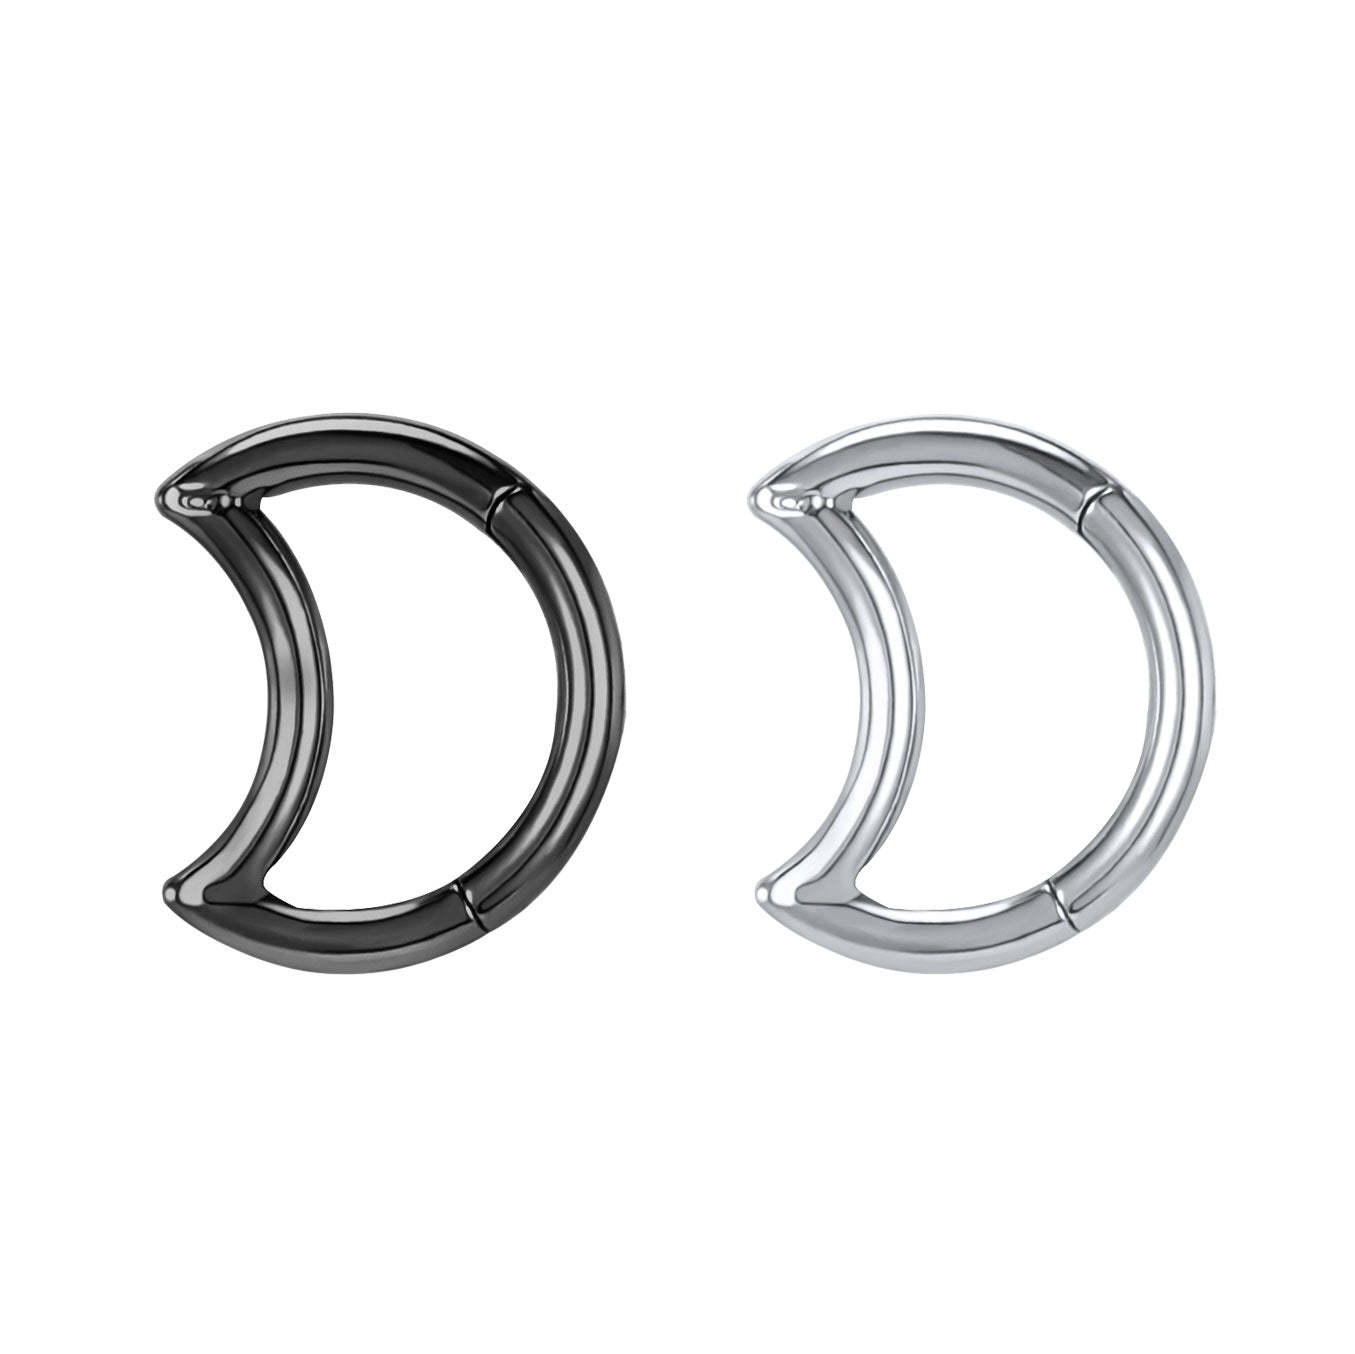 16g-moon-cute-nose-septum-ring-black-sliver-clicker-stainless-steel-helix-cartilage-piercing